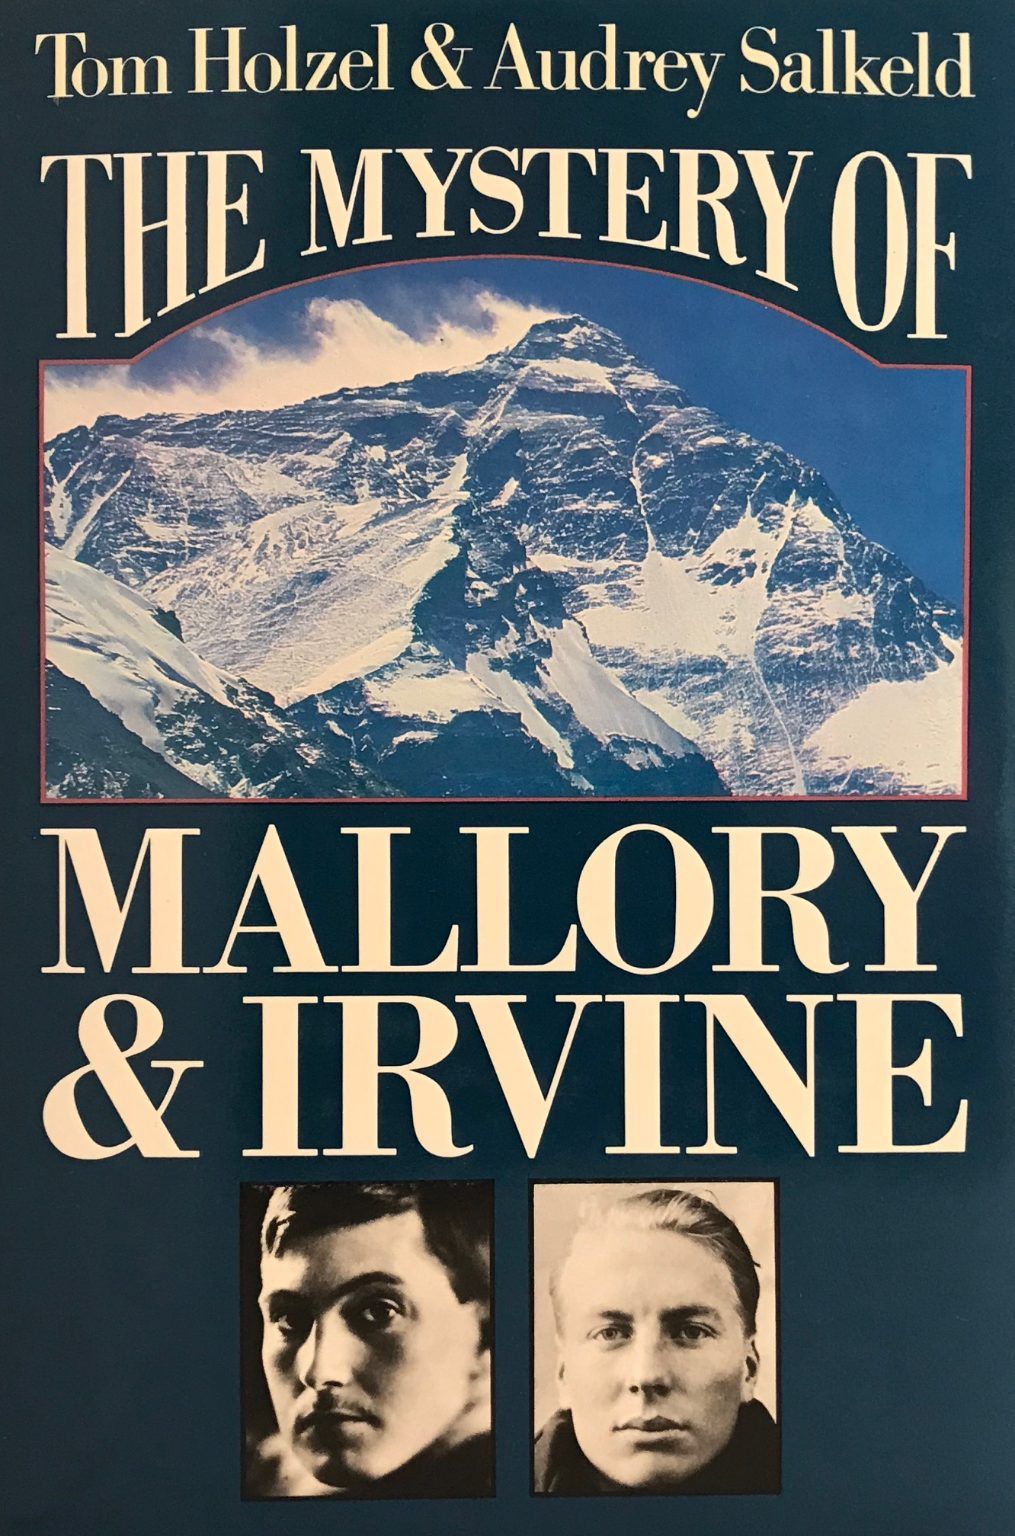 THE MYSTERY OF MALLORY & IRVINE